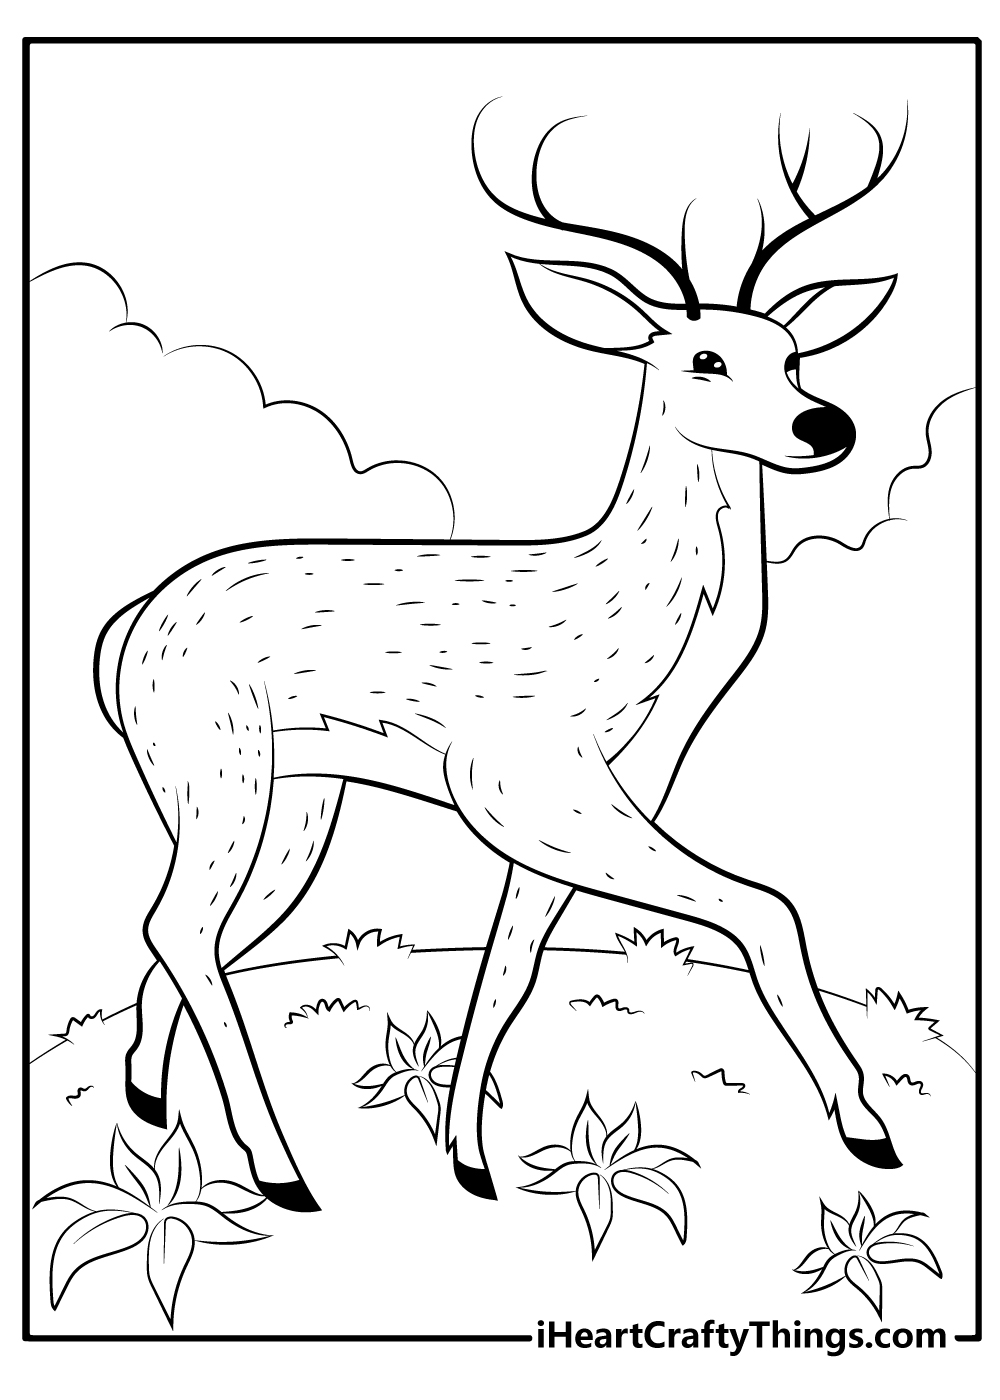 200+ Deer Coloring Pages for Adults: Explore Your Creativity 191